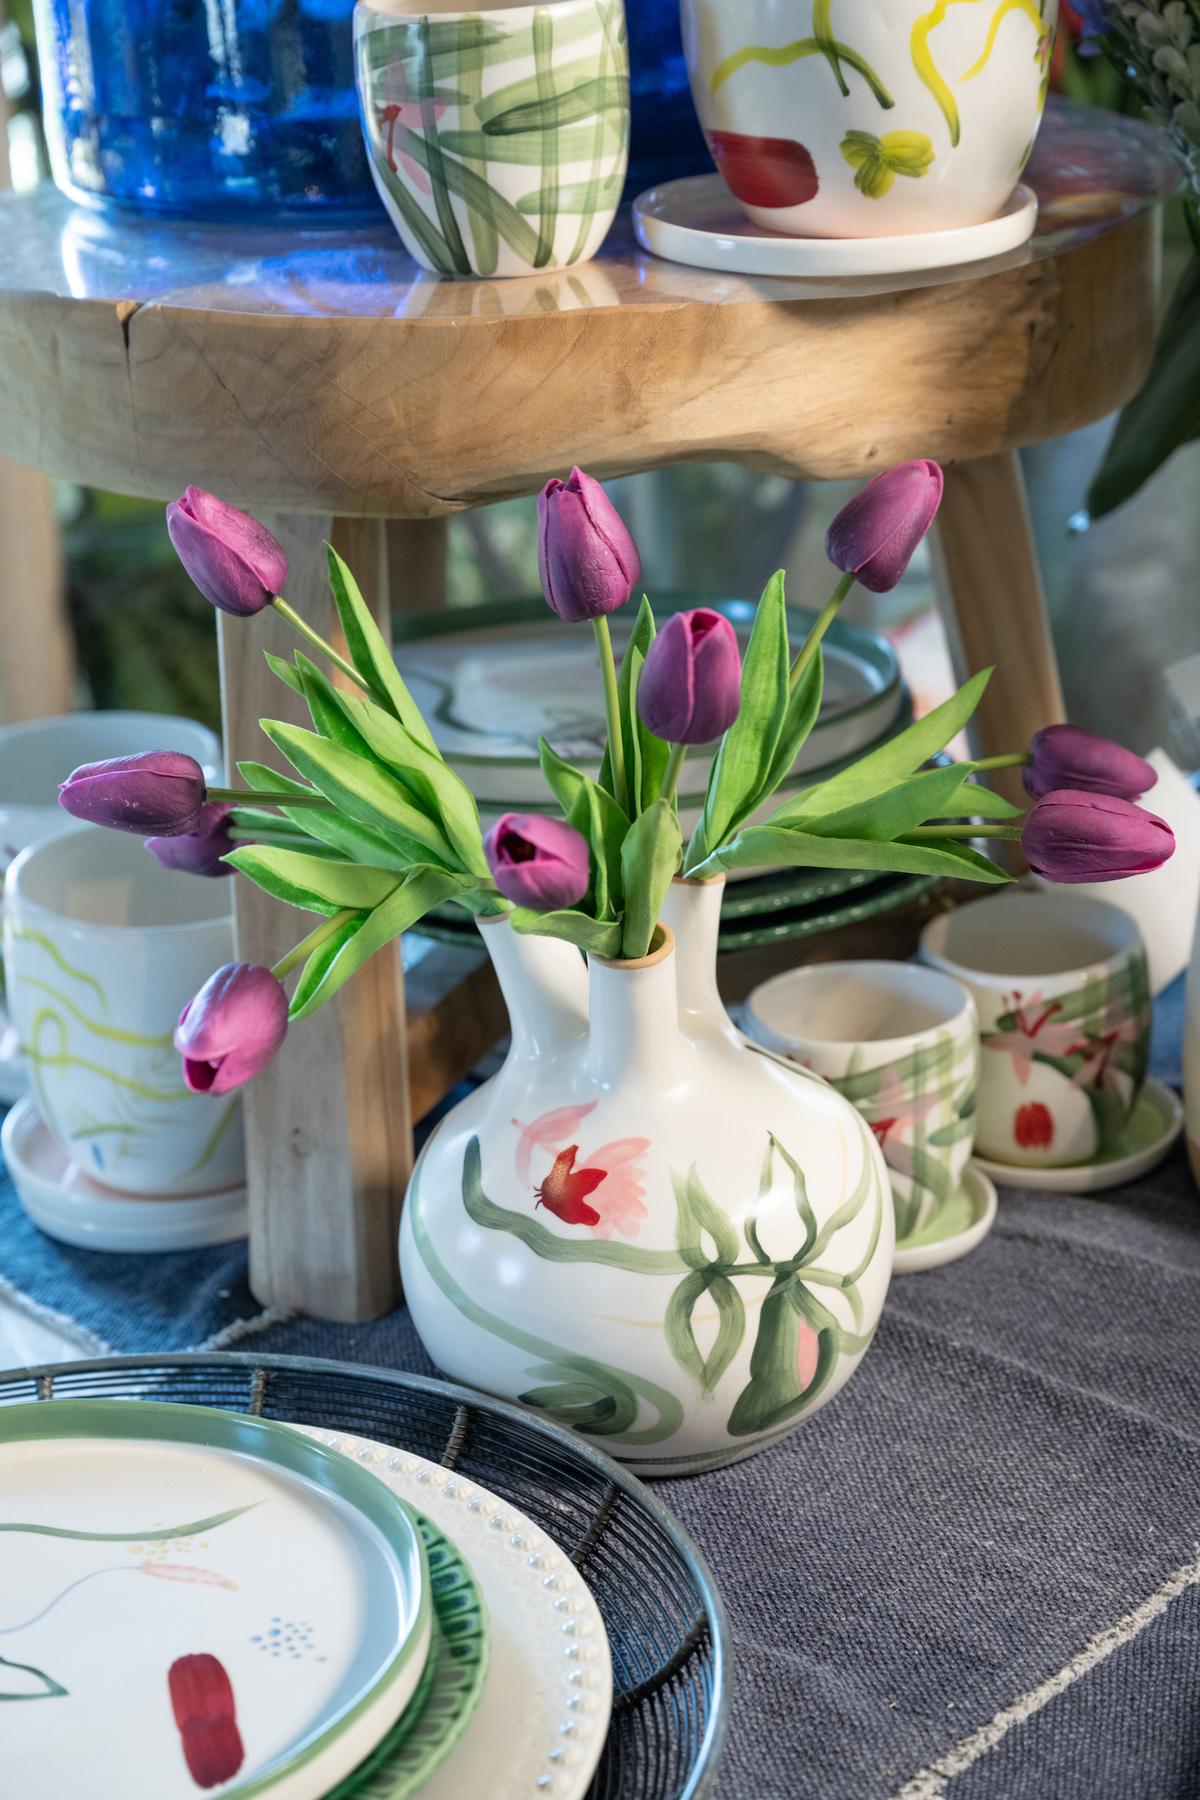 A hand-painted bud vase is a creative way to display a spray of tulips. (Handout/TNS)